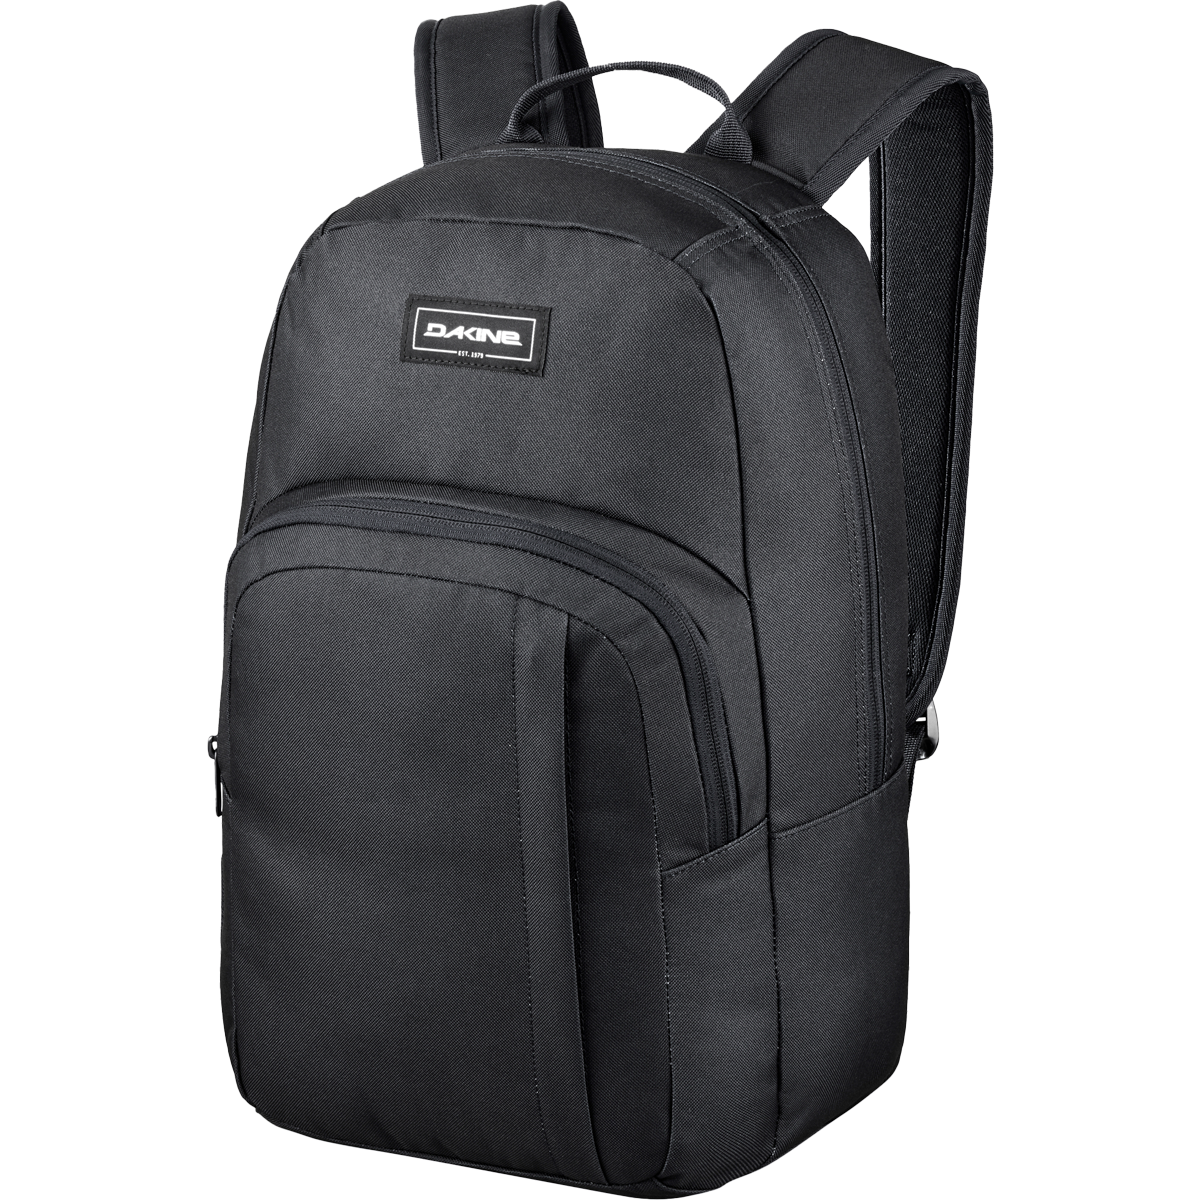 Class Backpack 25L alternate view